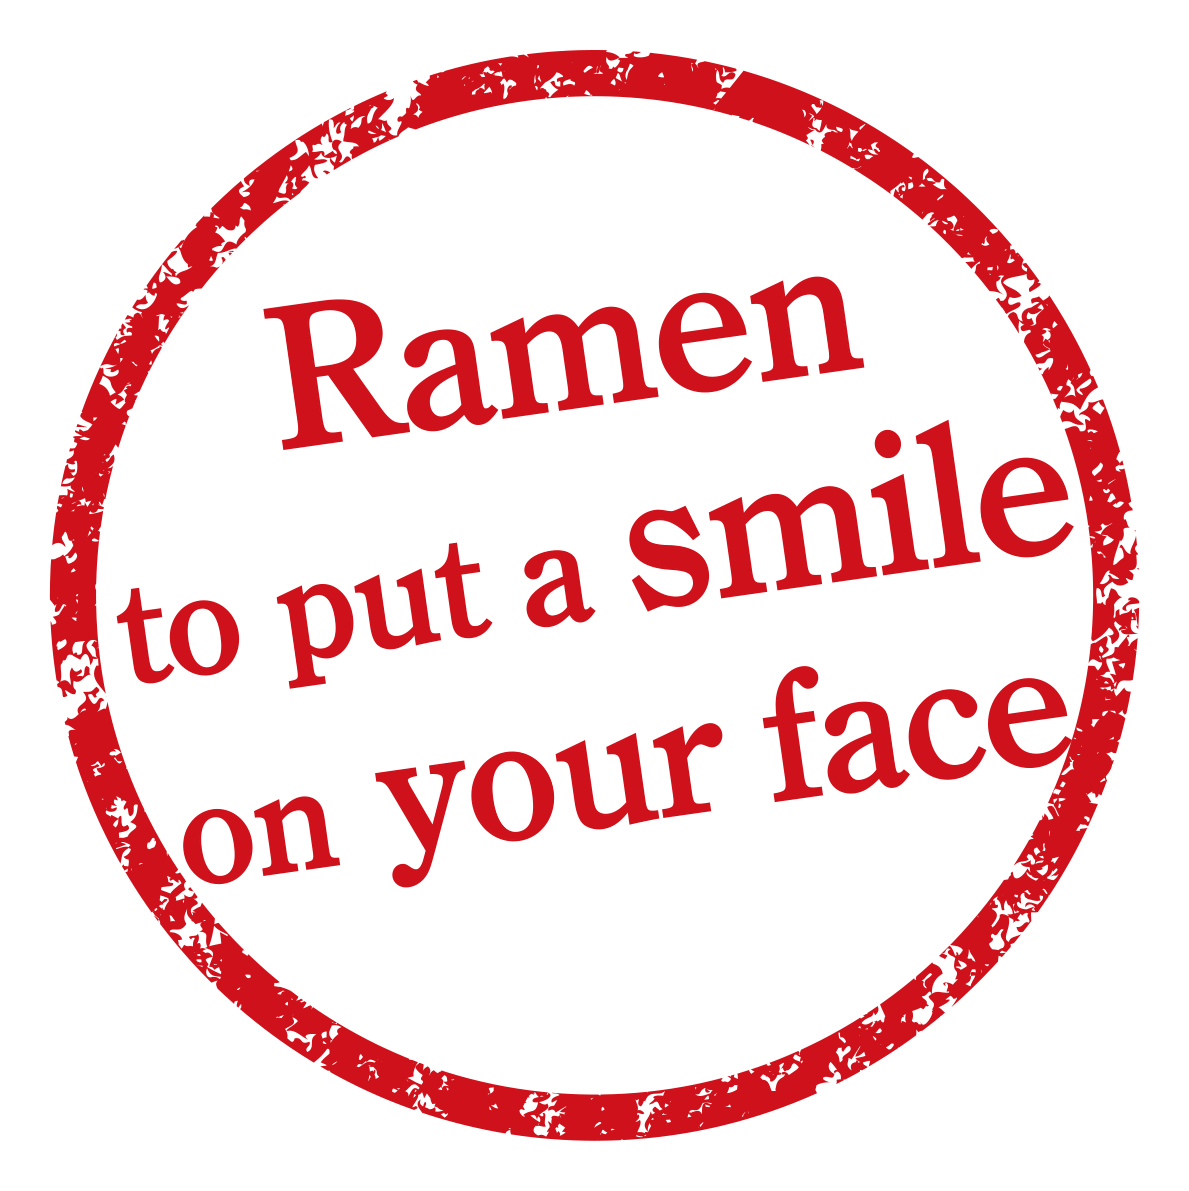 Ramen to put a smile on your face